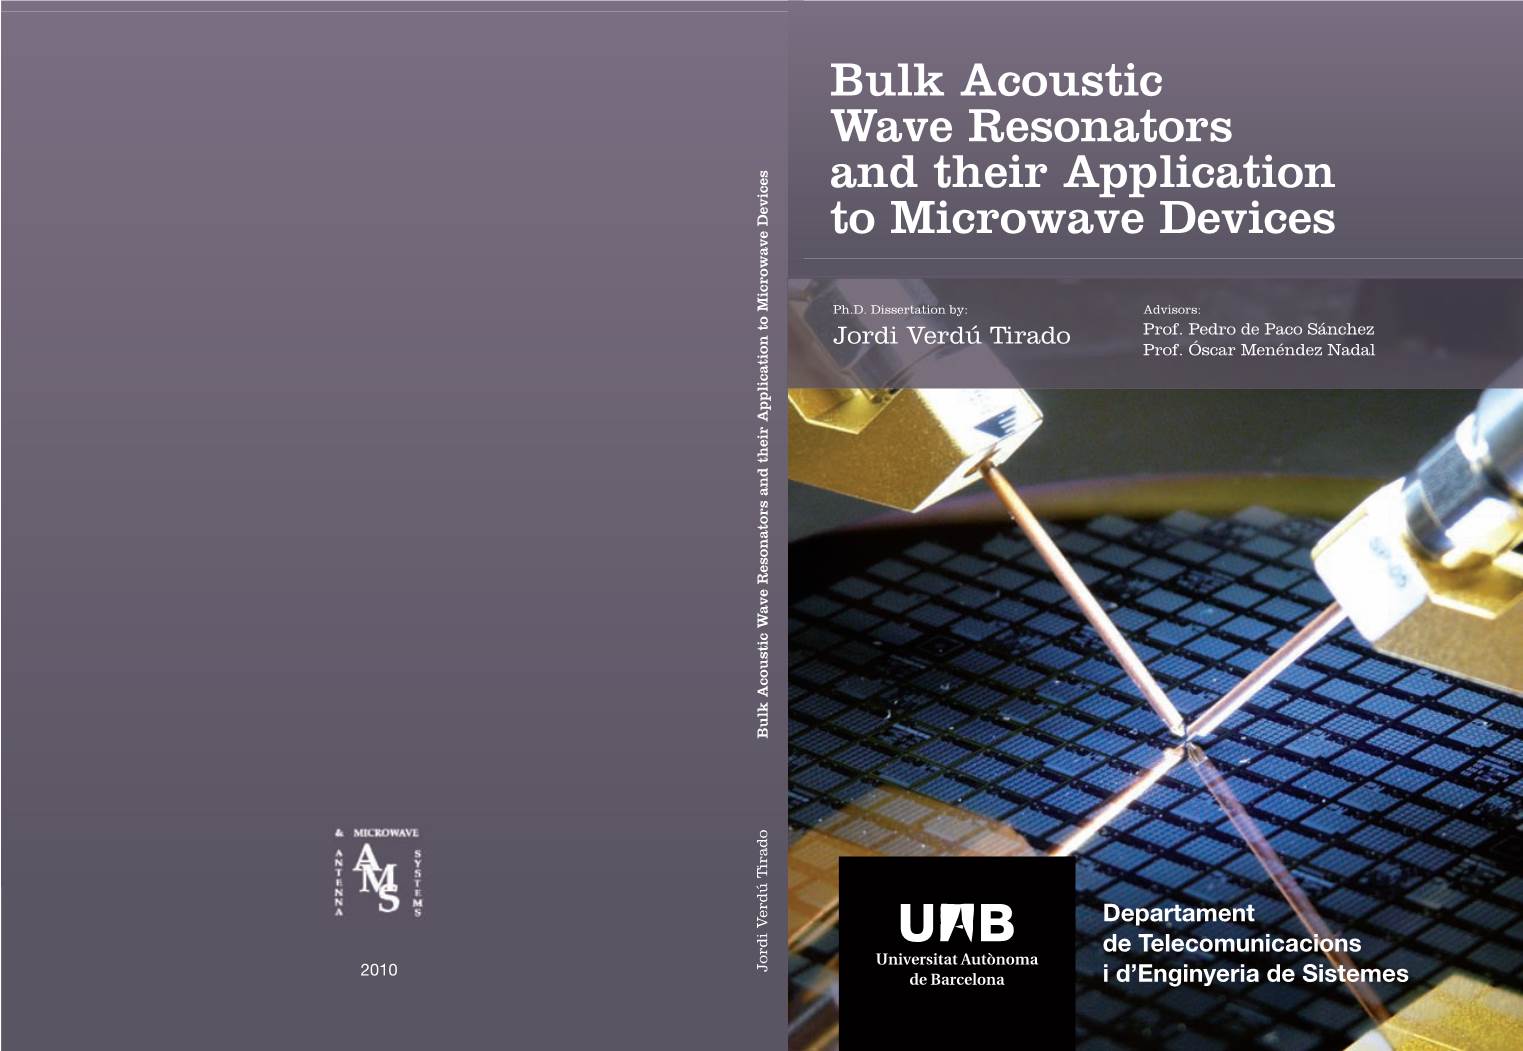 Bulk Acoustic Wave Resonators and Their Application to Microwave Devices